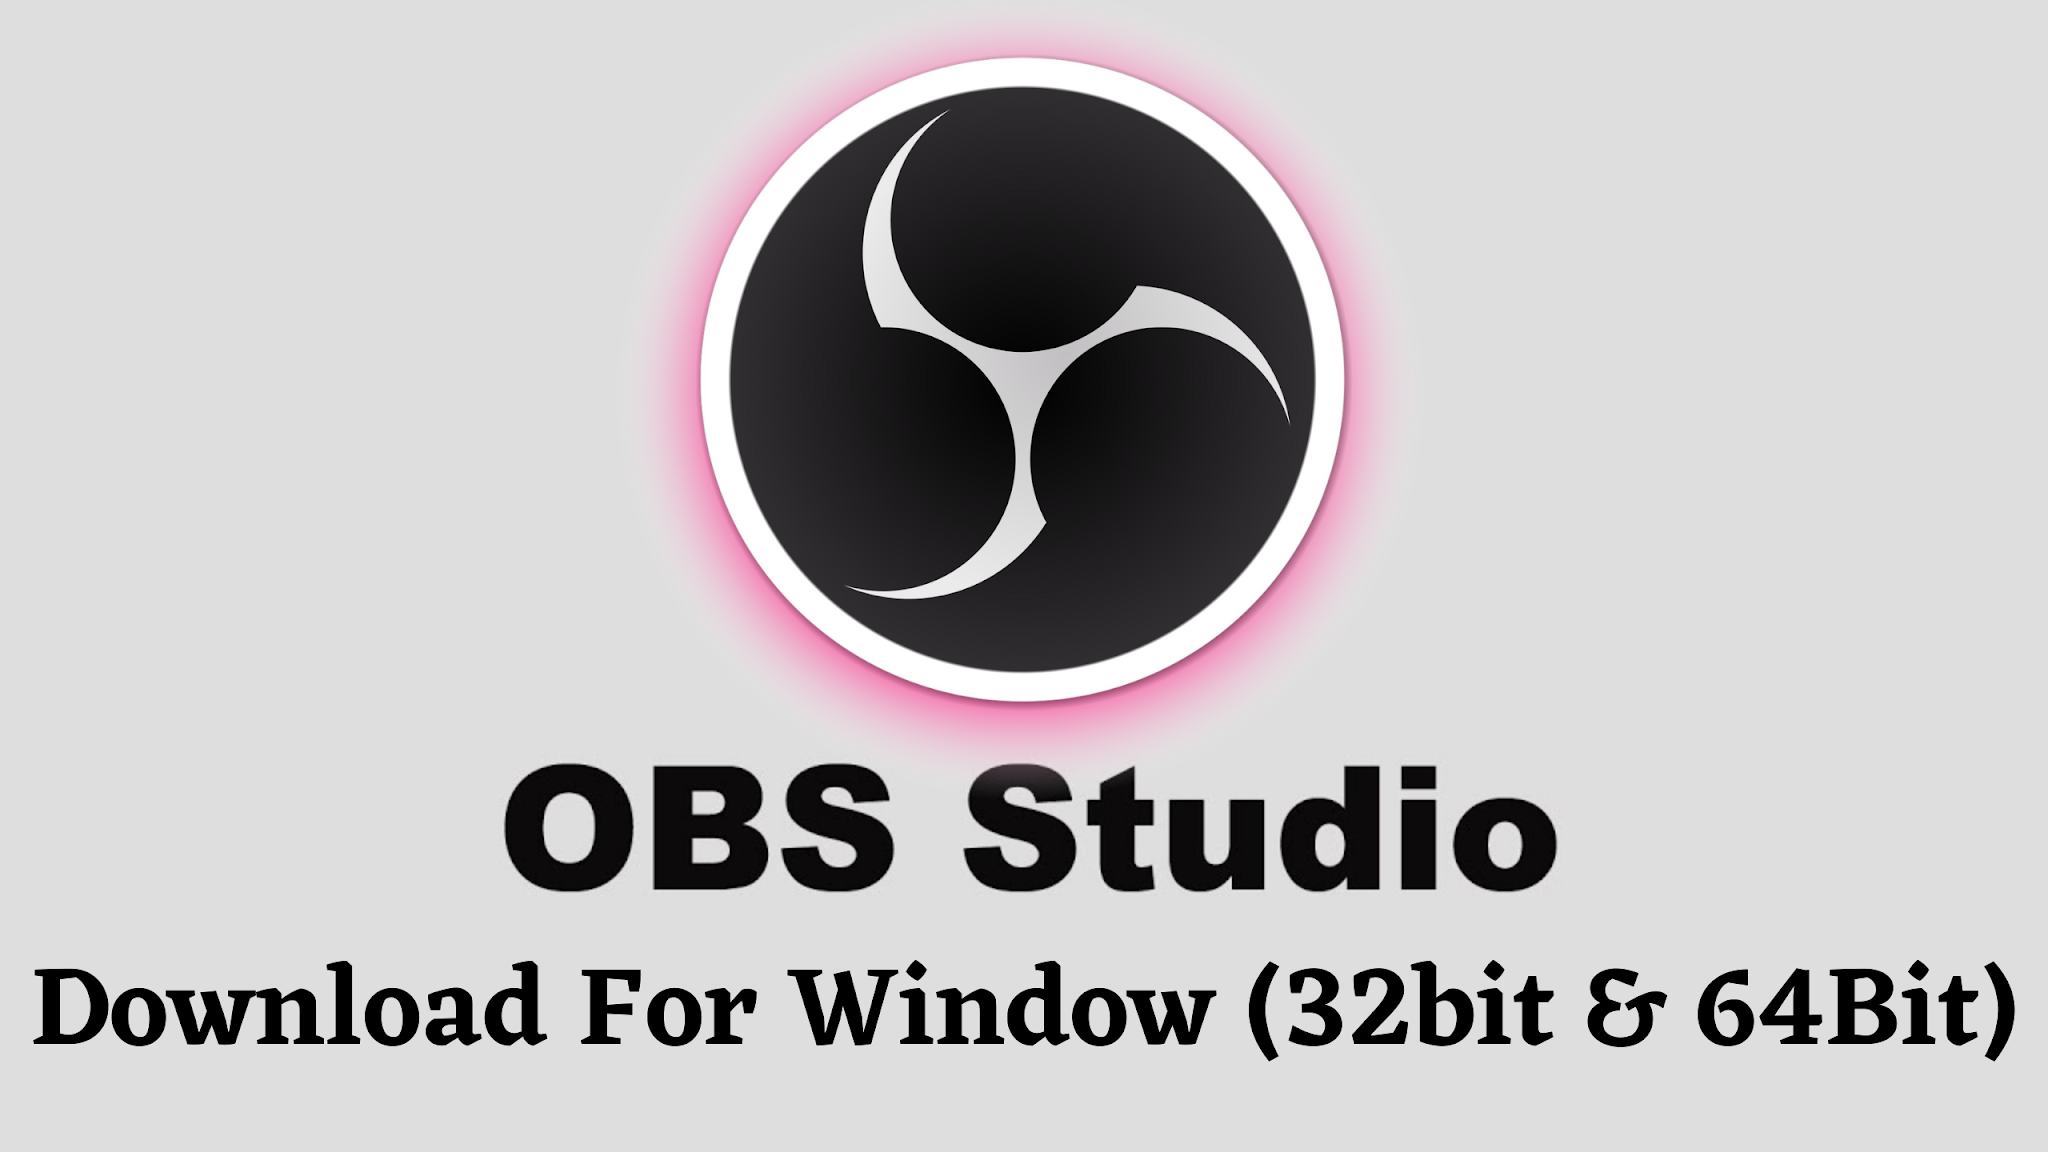 How To Download Obs Studio 21 Latest Version 32bit Or 64bit For Windows 10 8 7